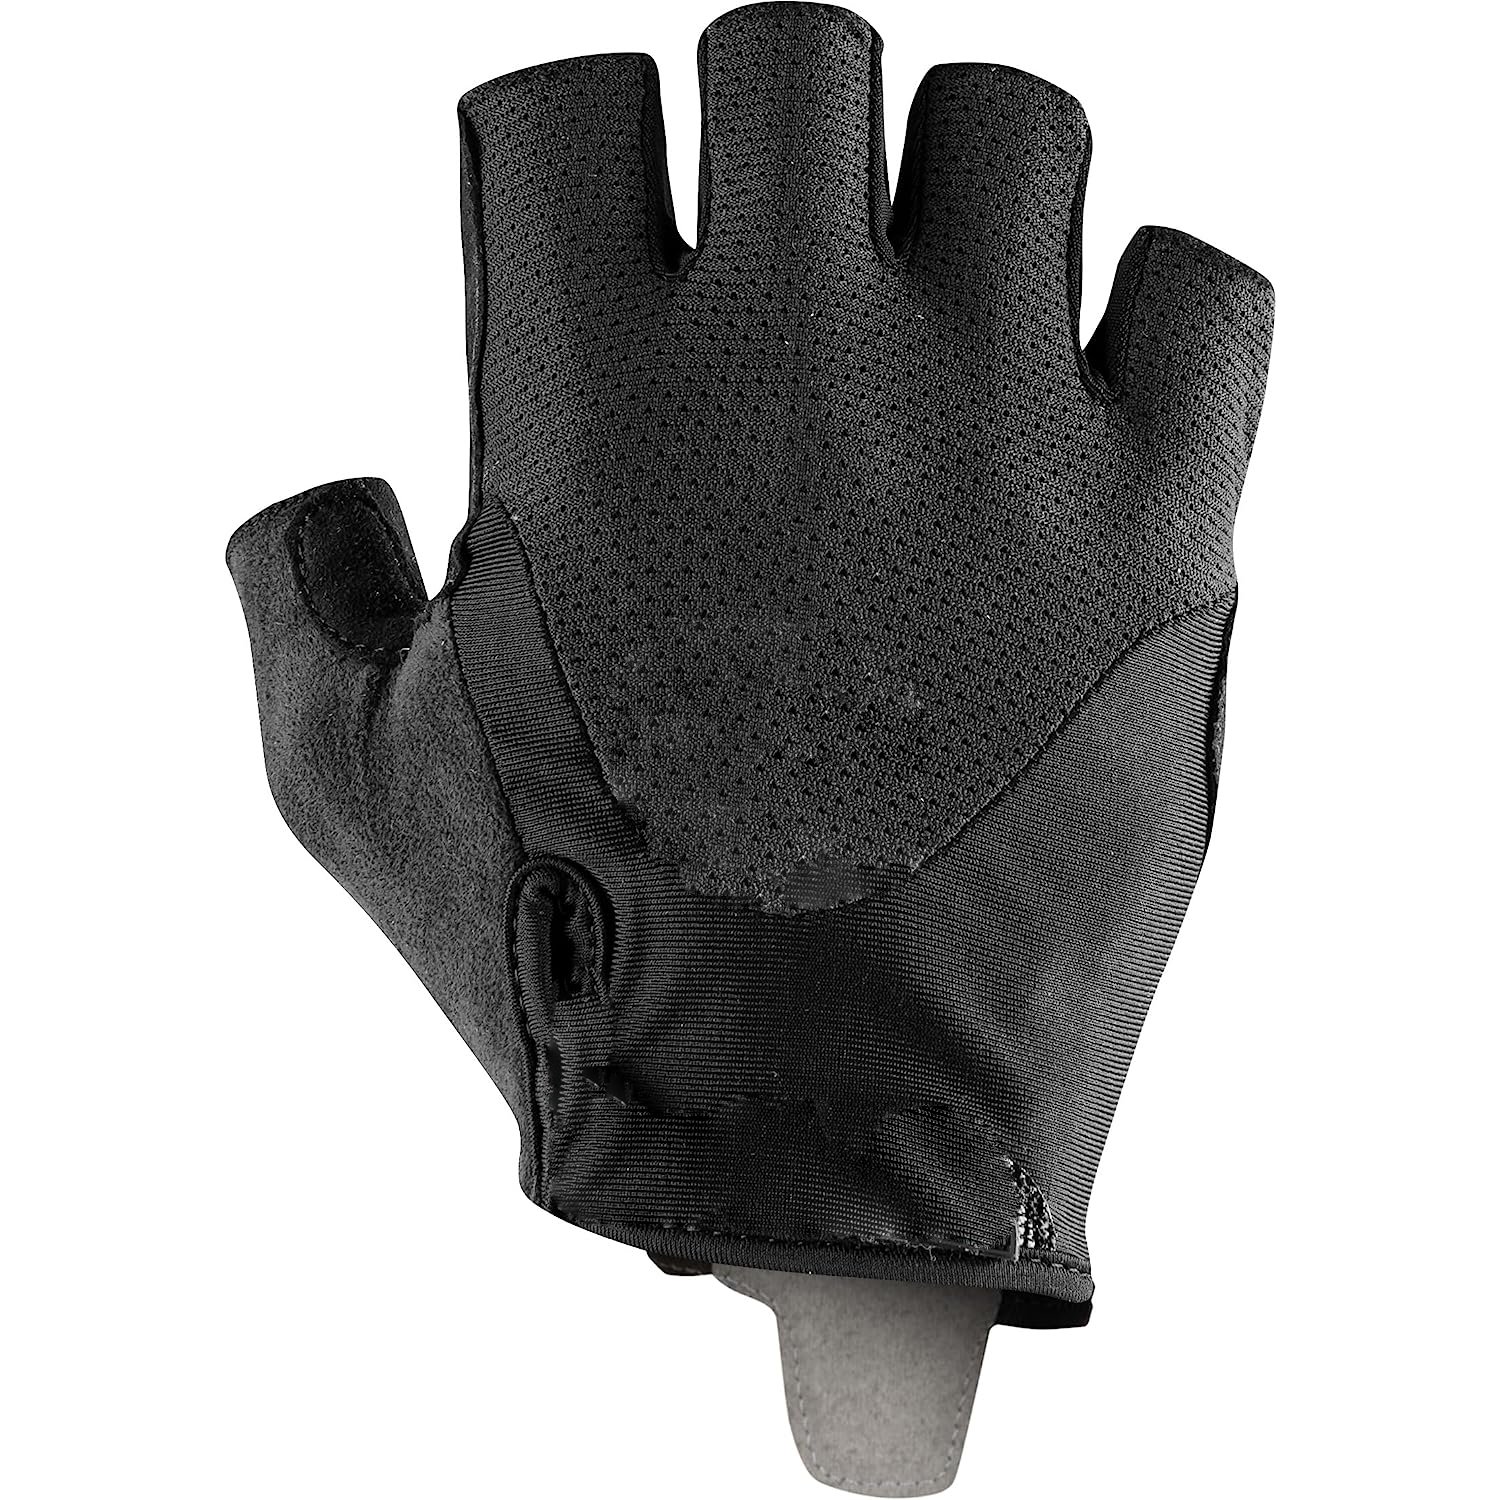 Cycling Arenberg Gel 2 Glove for Road and Gravel Biking l Cycling